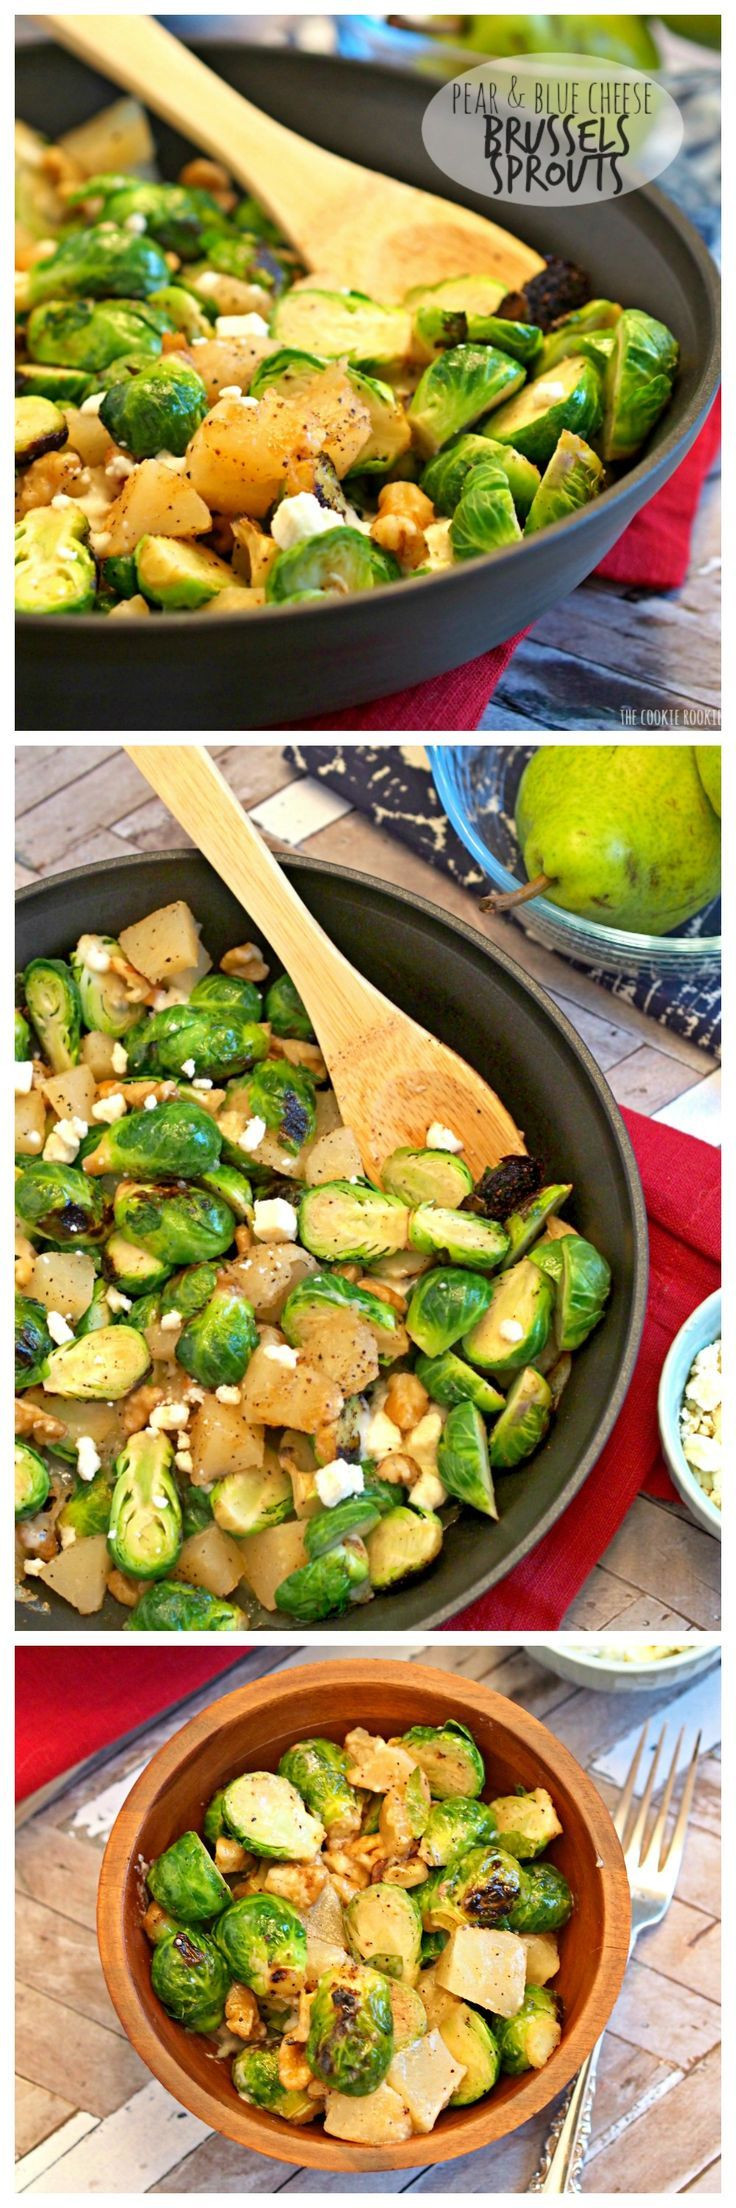 Brussels Sprouts Thanksgiving Side Dishes
 Pear and Blue Cheese Roasted Brussels Sprouts